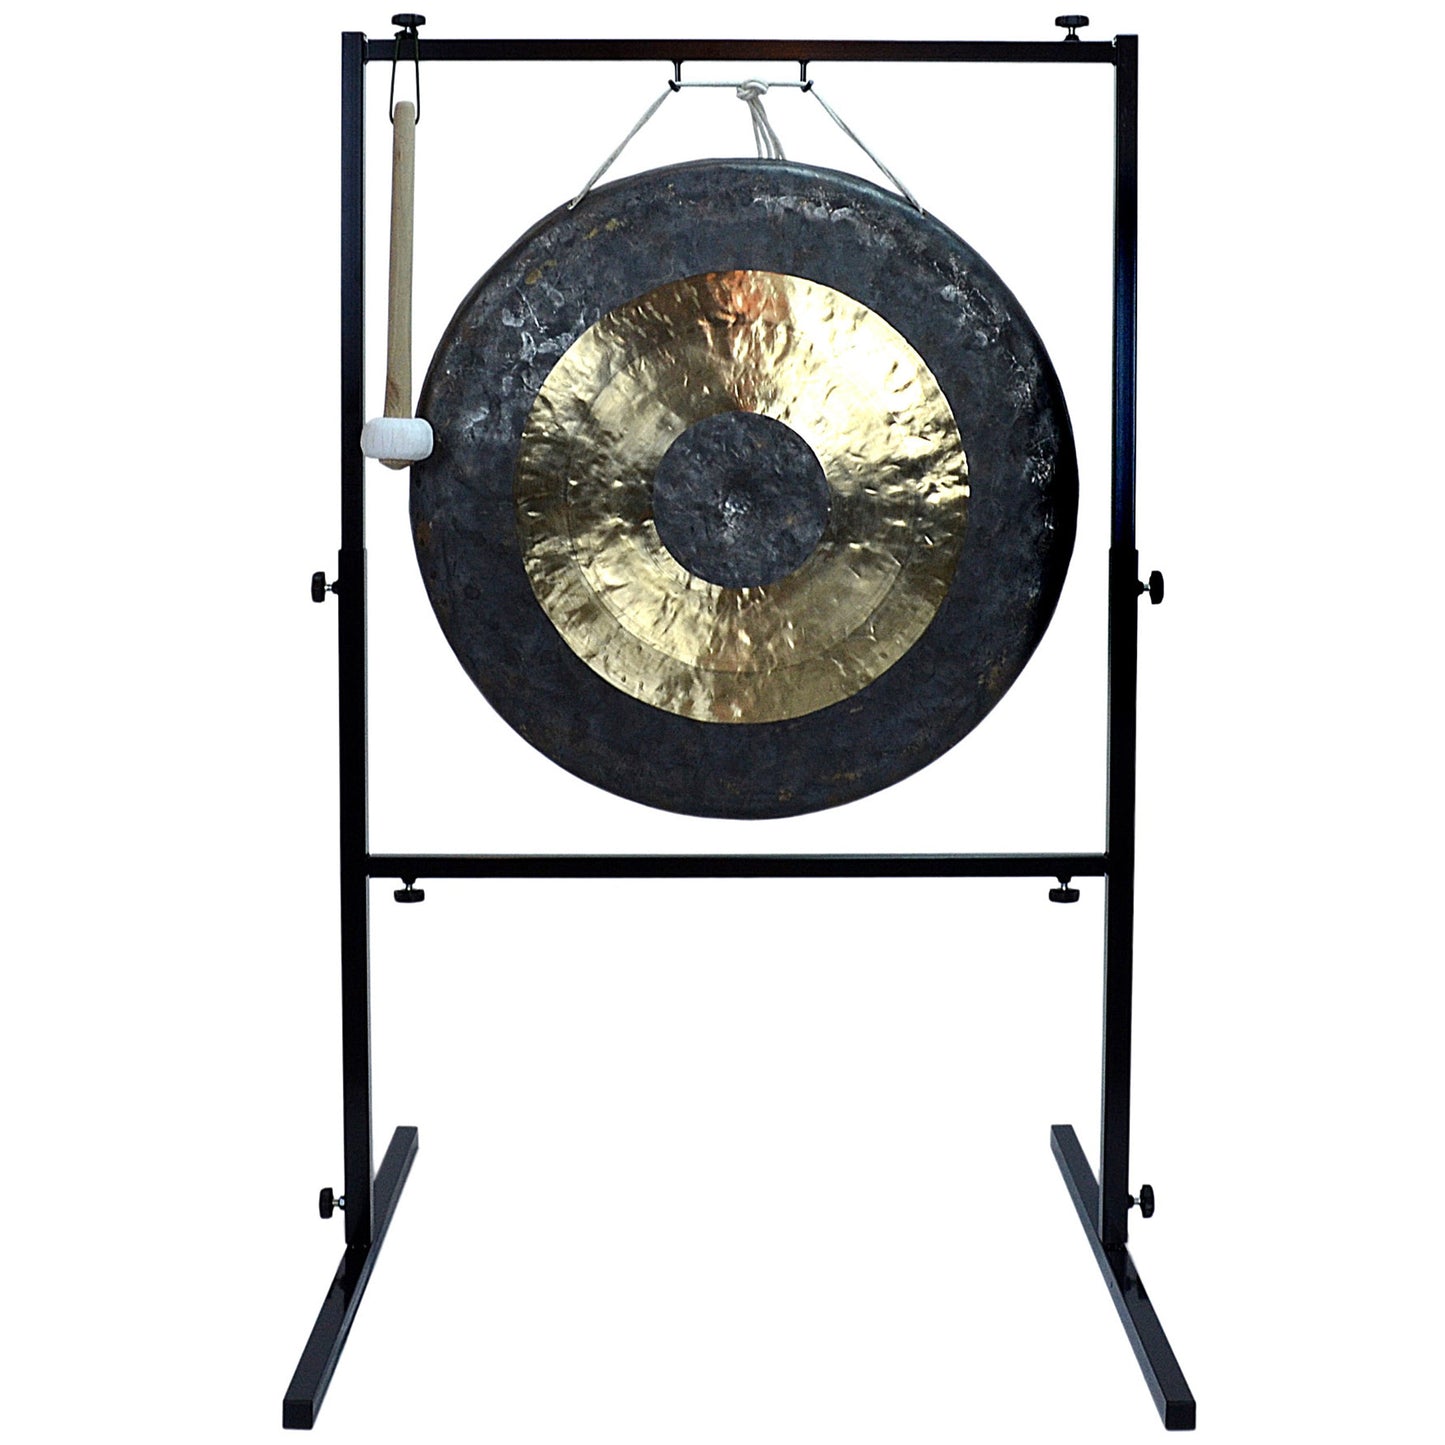 The Gong Shop Featured Products 24" Medium Chau Gongs on Adjustable Metal Gong Stand